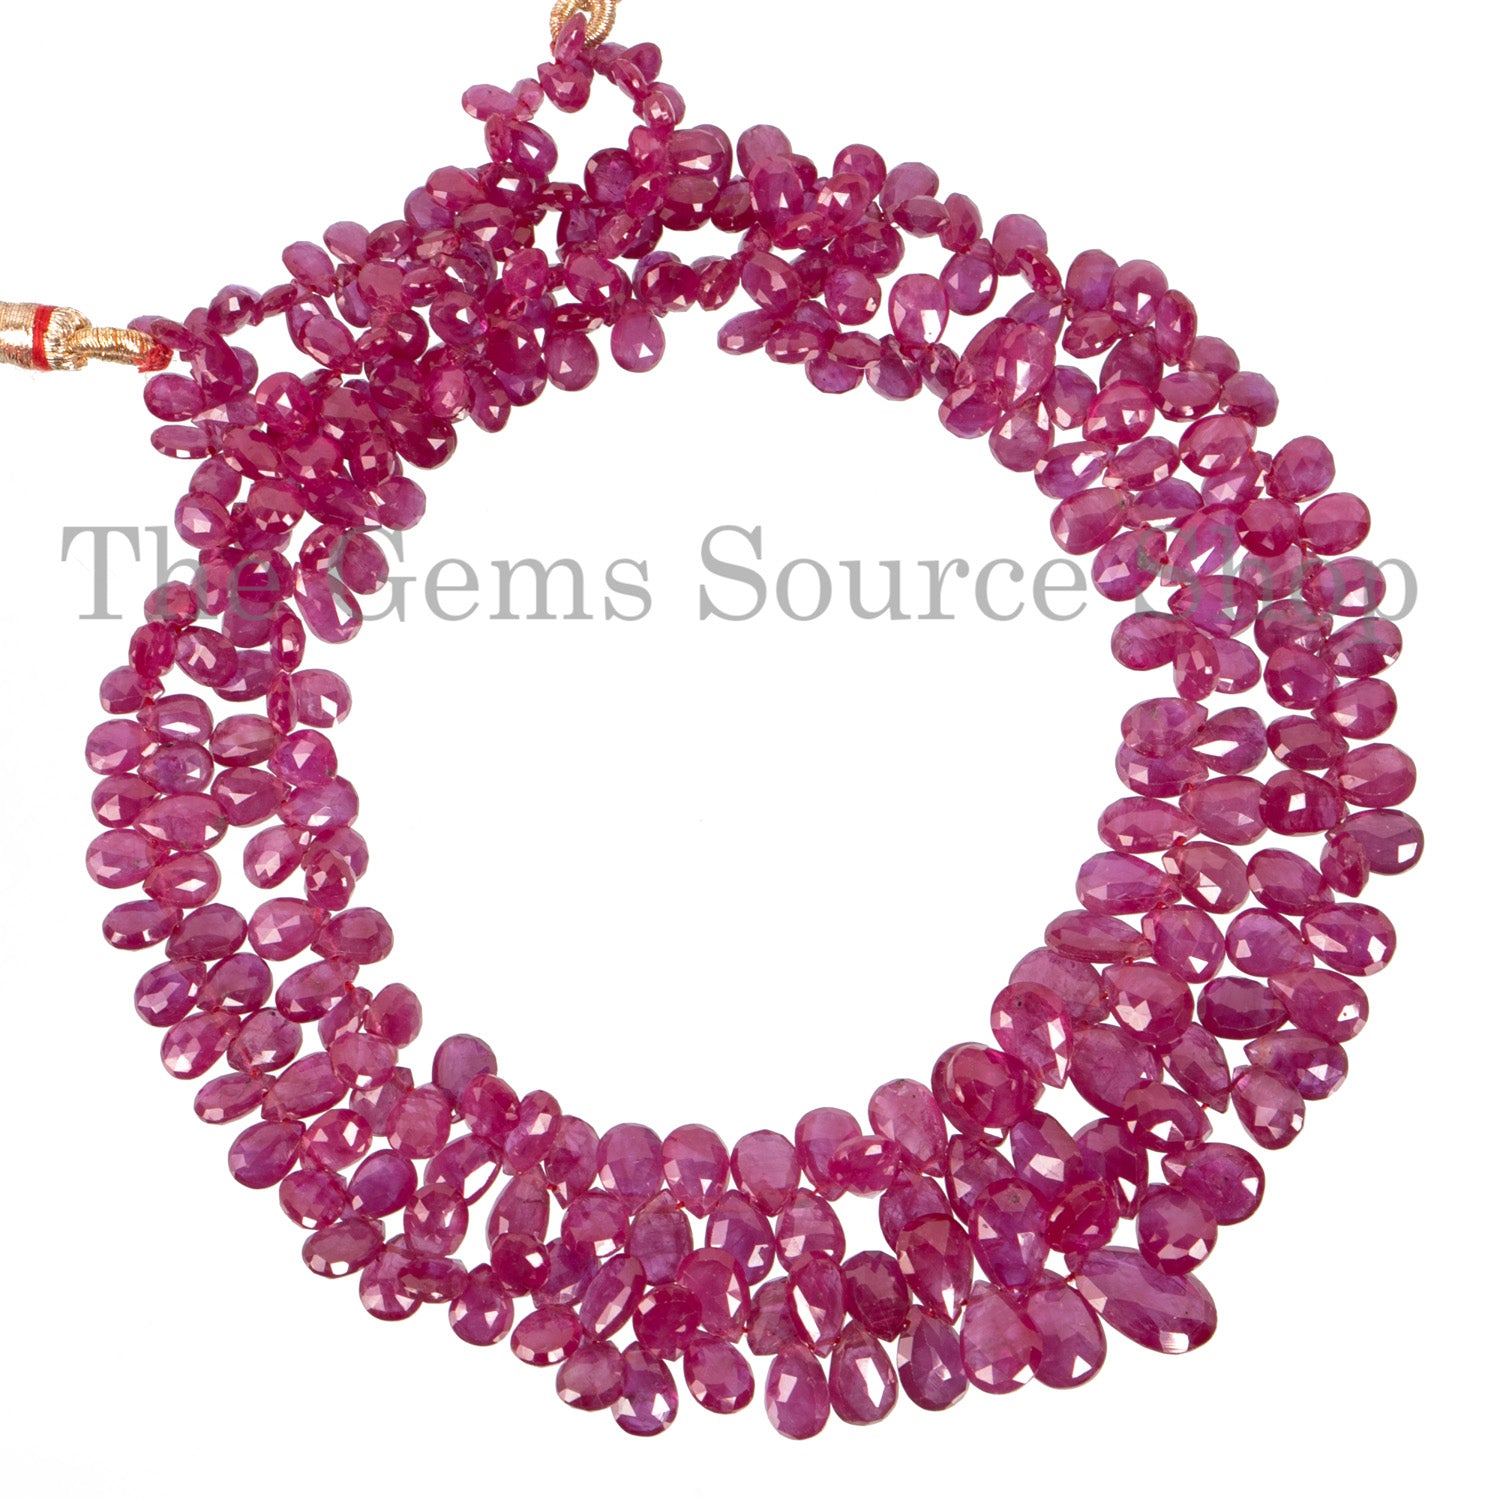 Super Top Quality Rare Burma Ruby Faceted Pear Shape Beads, Pear Briolette